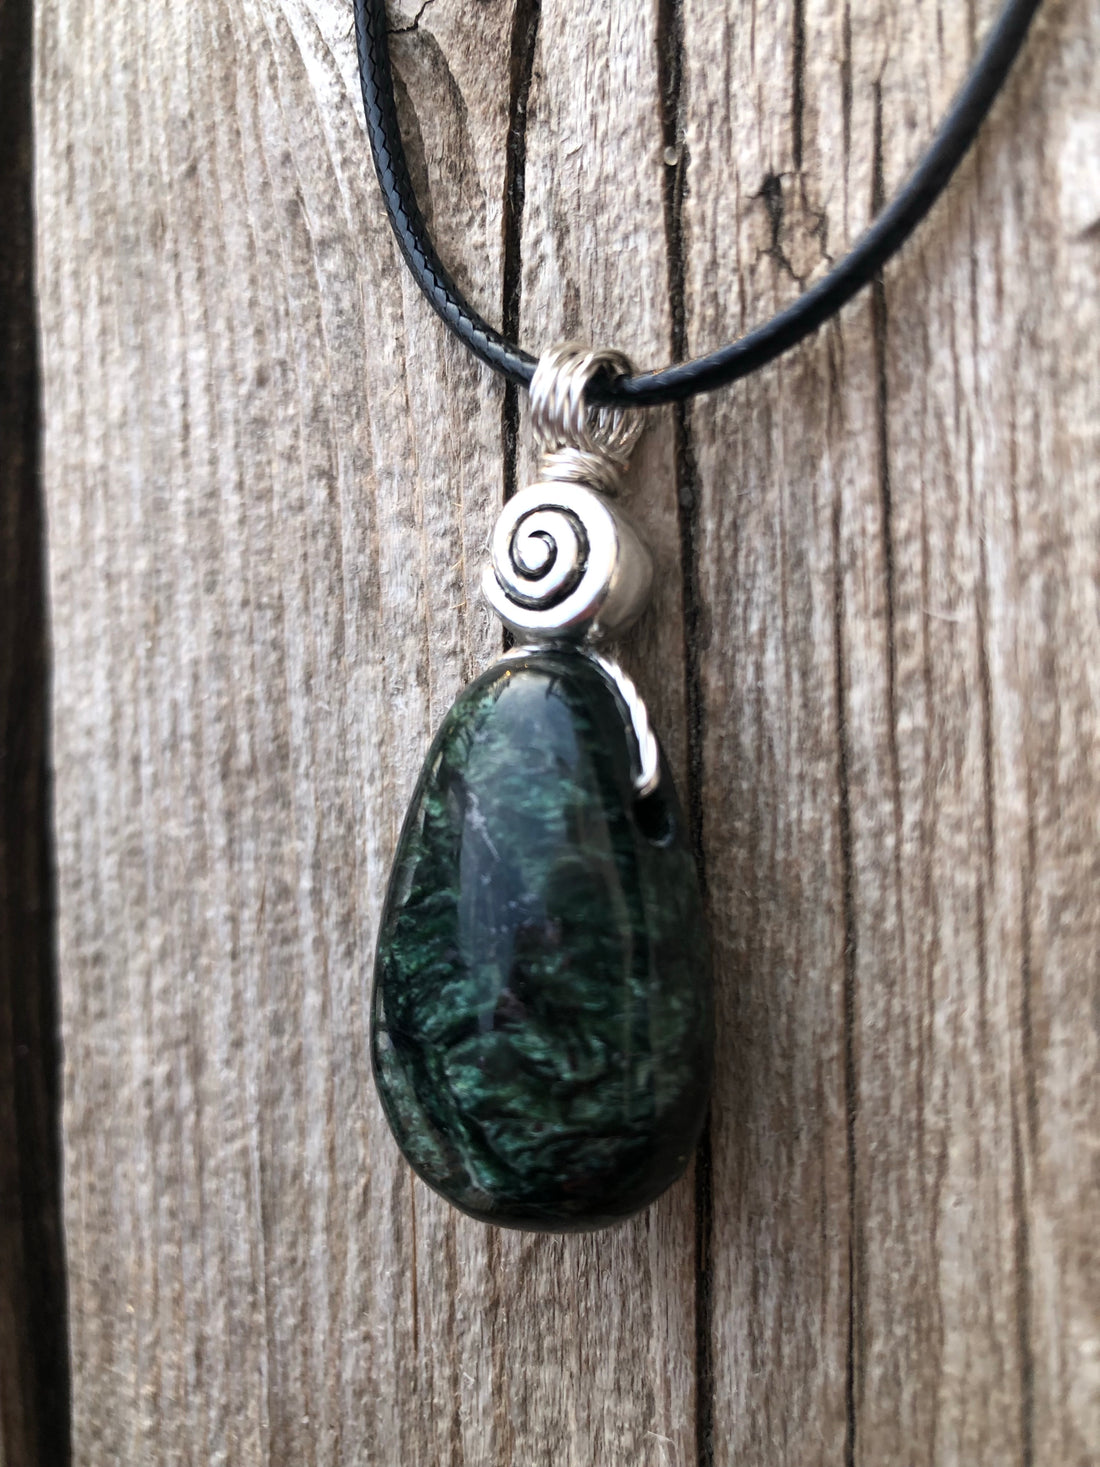 Seraphinite For Enlightenment and Opening Chakras. Swirl Signifies Consciousness